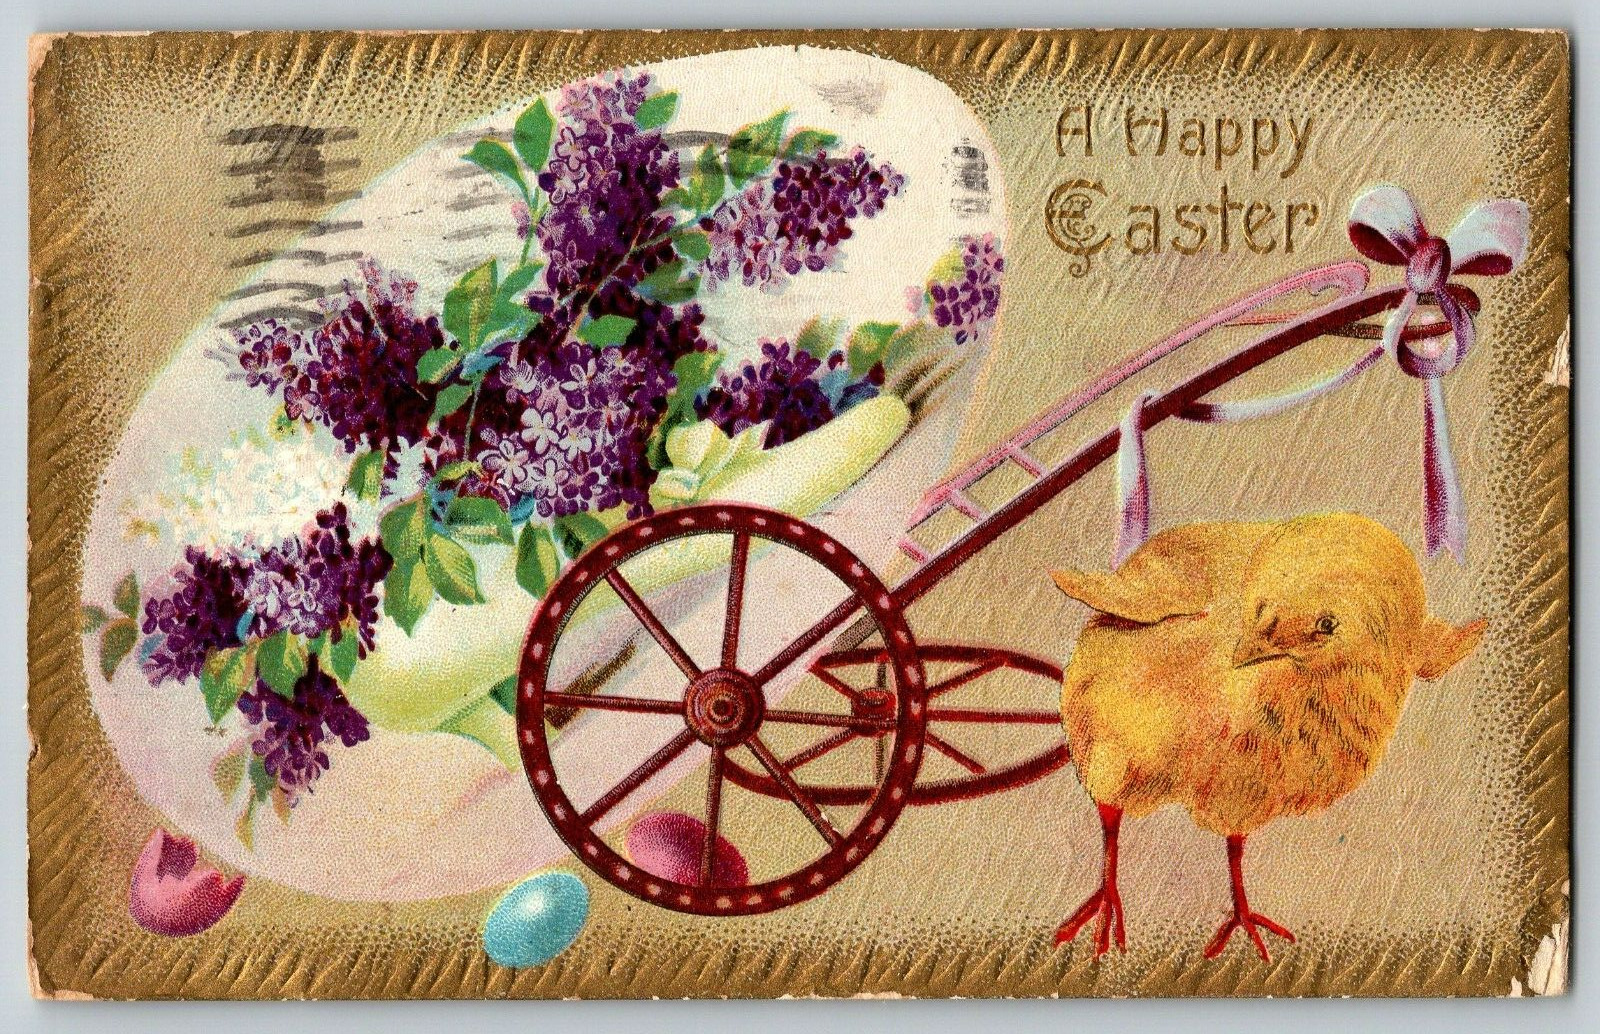 A Happy Easter - Chicks Carrying the Big Egg - Vintage Postcard, Posted